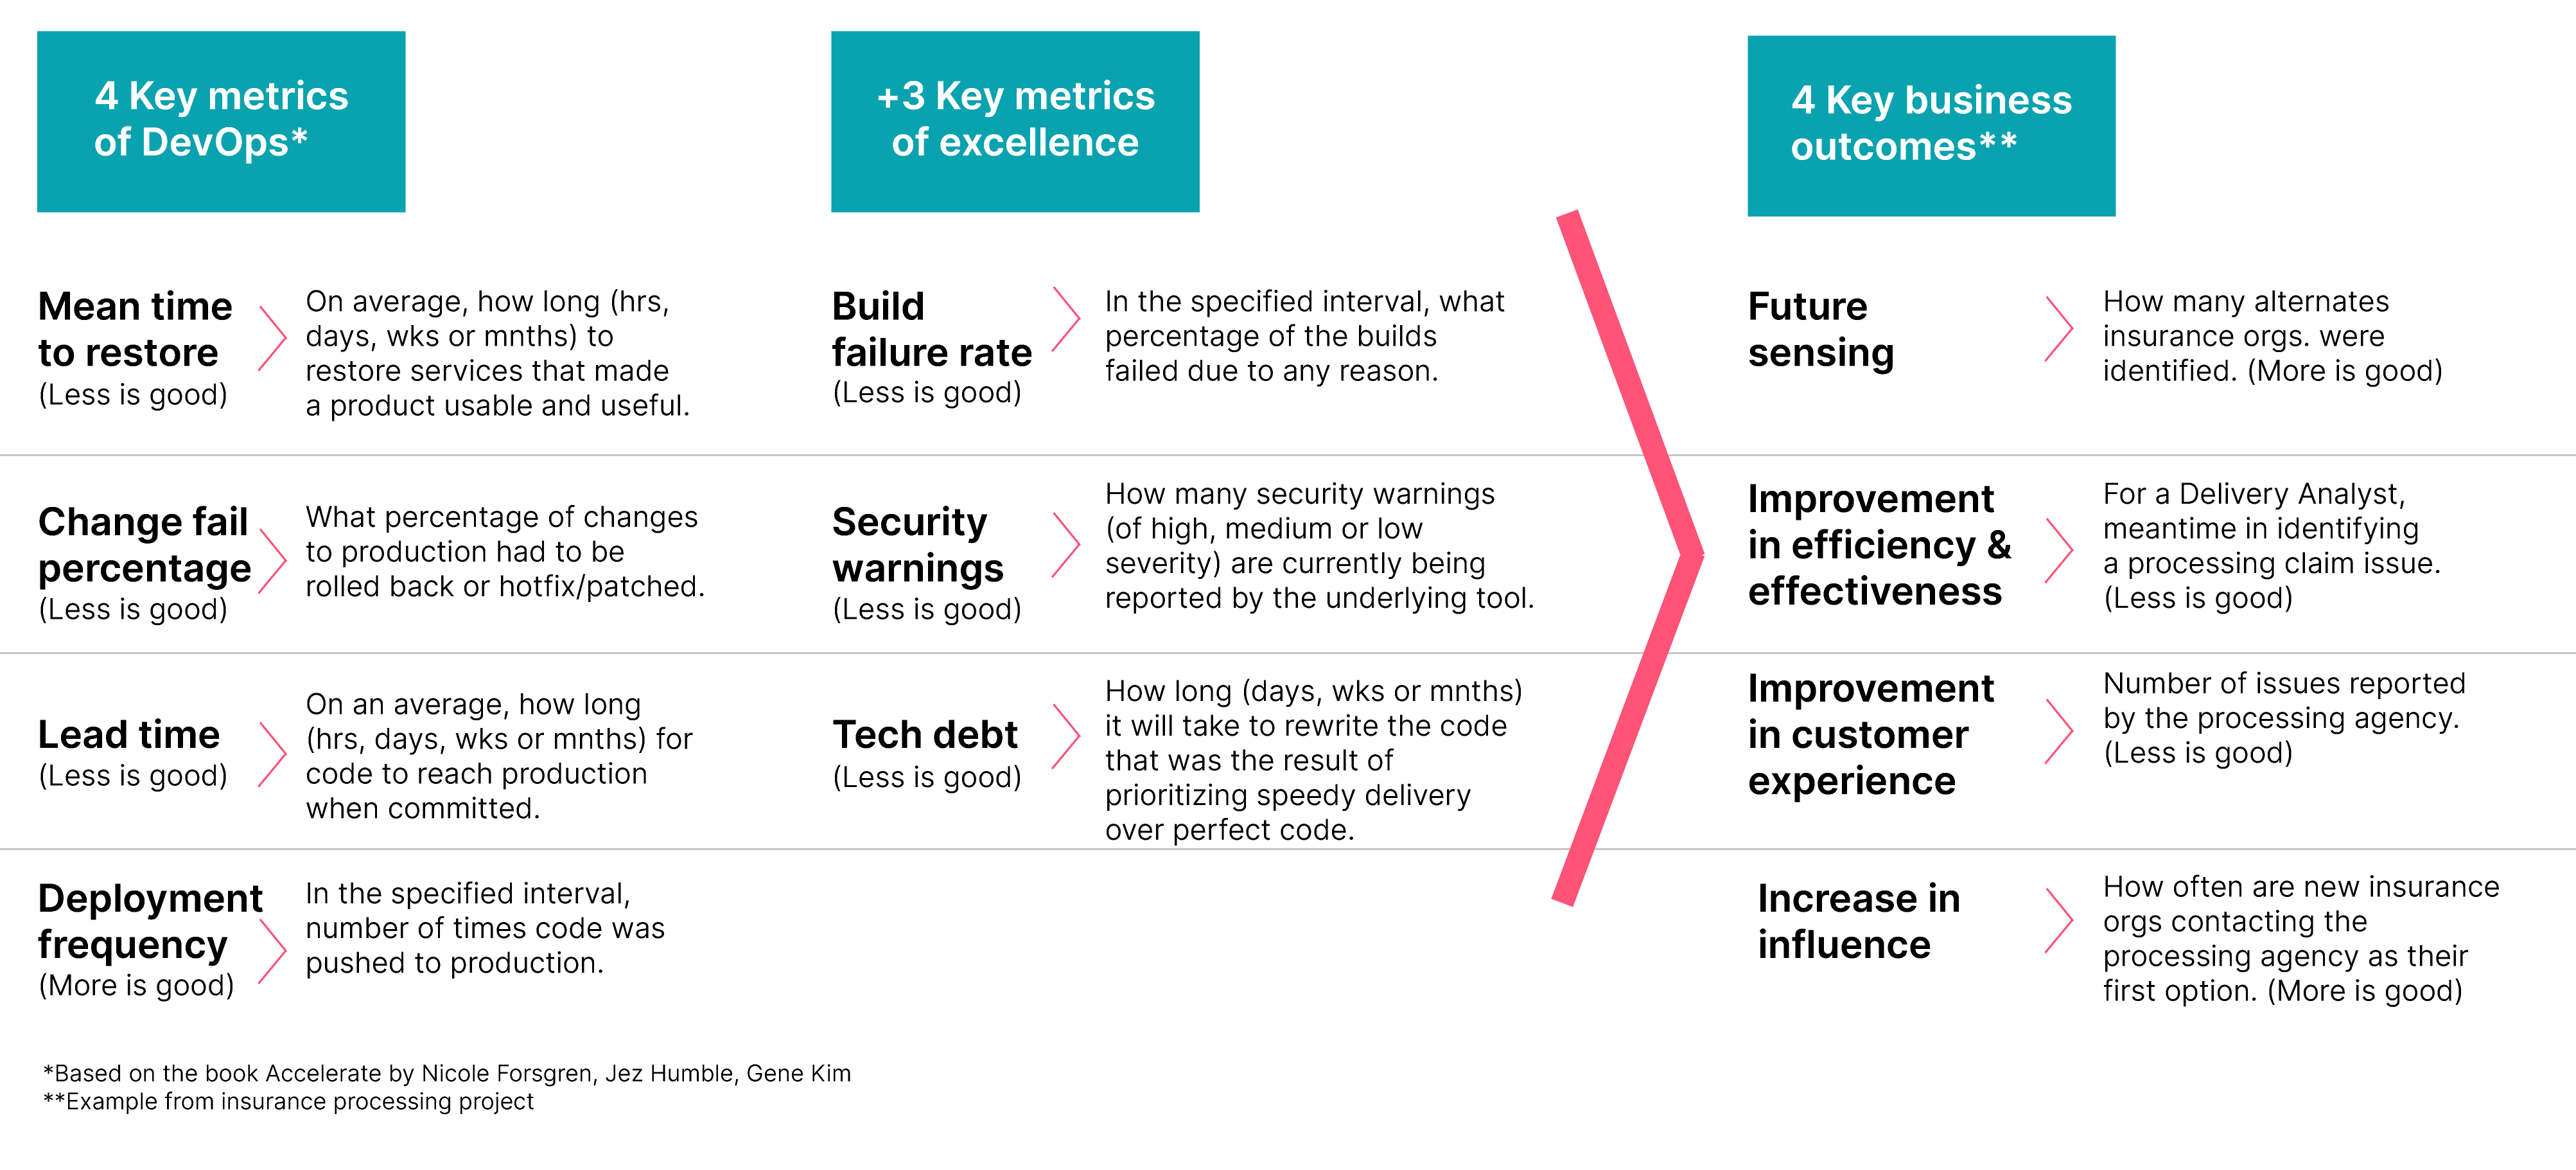 Measuring delivery metrics and outcomes-oriented metrics (for example: improvement in customer experience, improvement in efficiency) help teams to focus on impactful work, rather than busywork